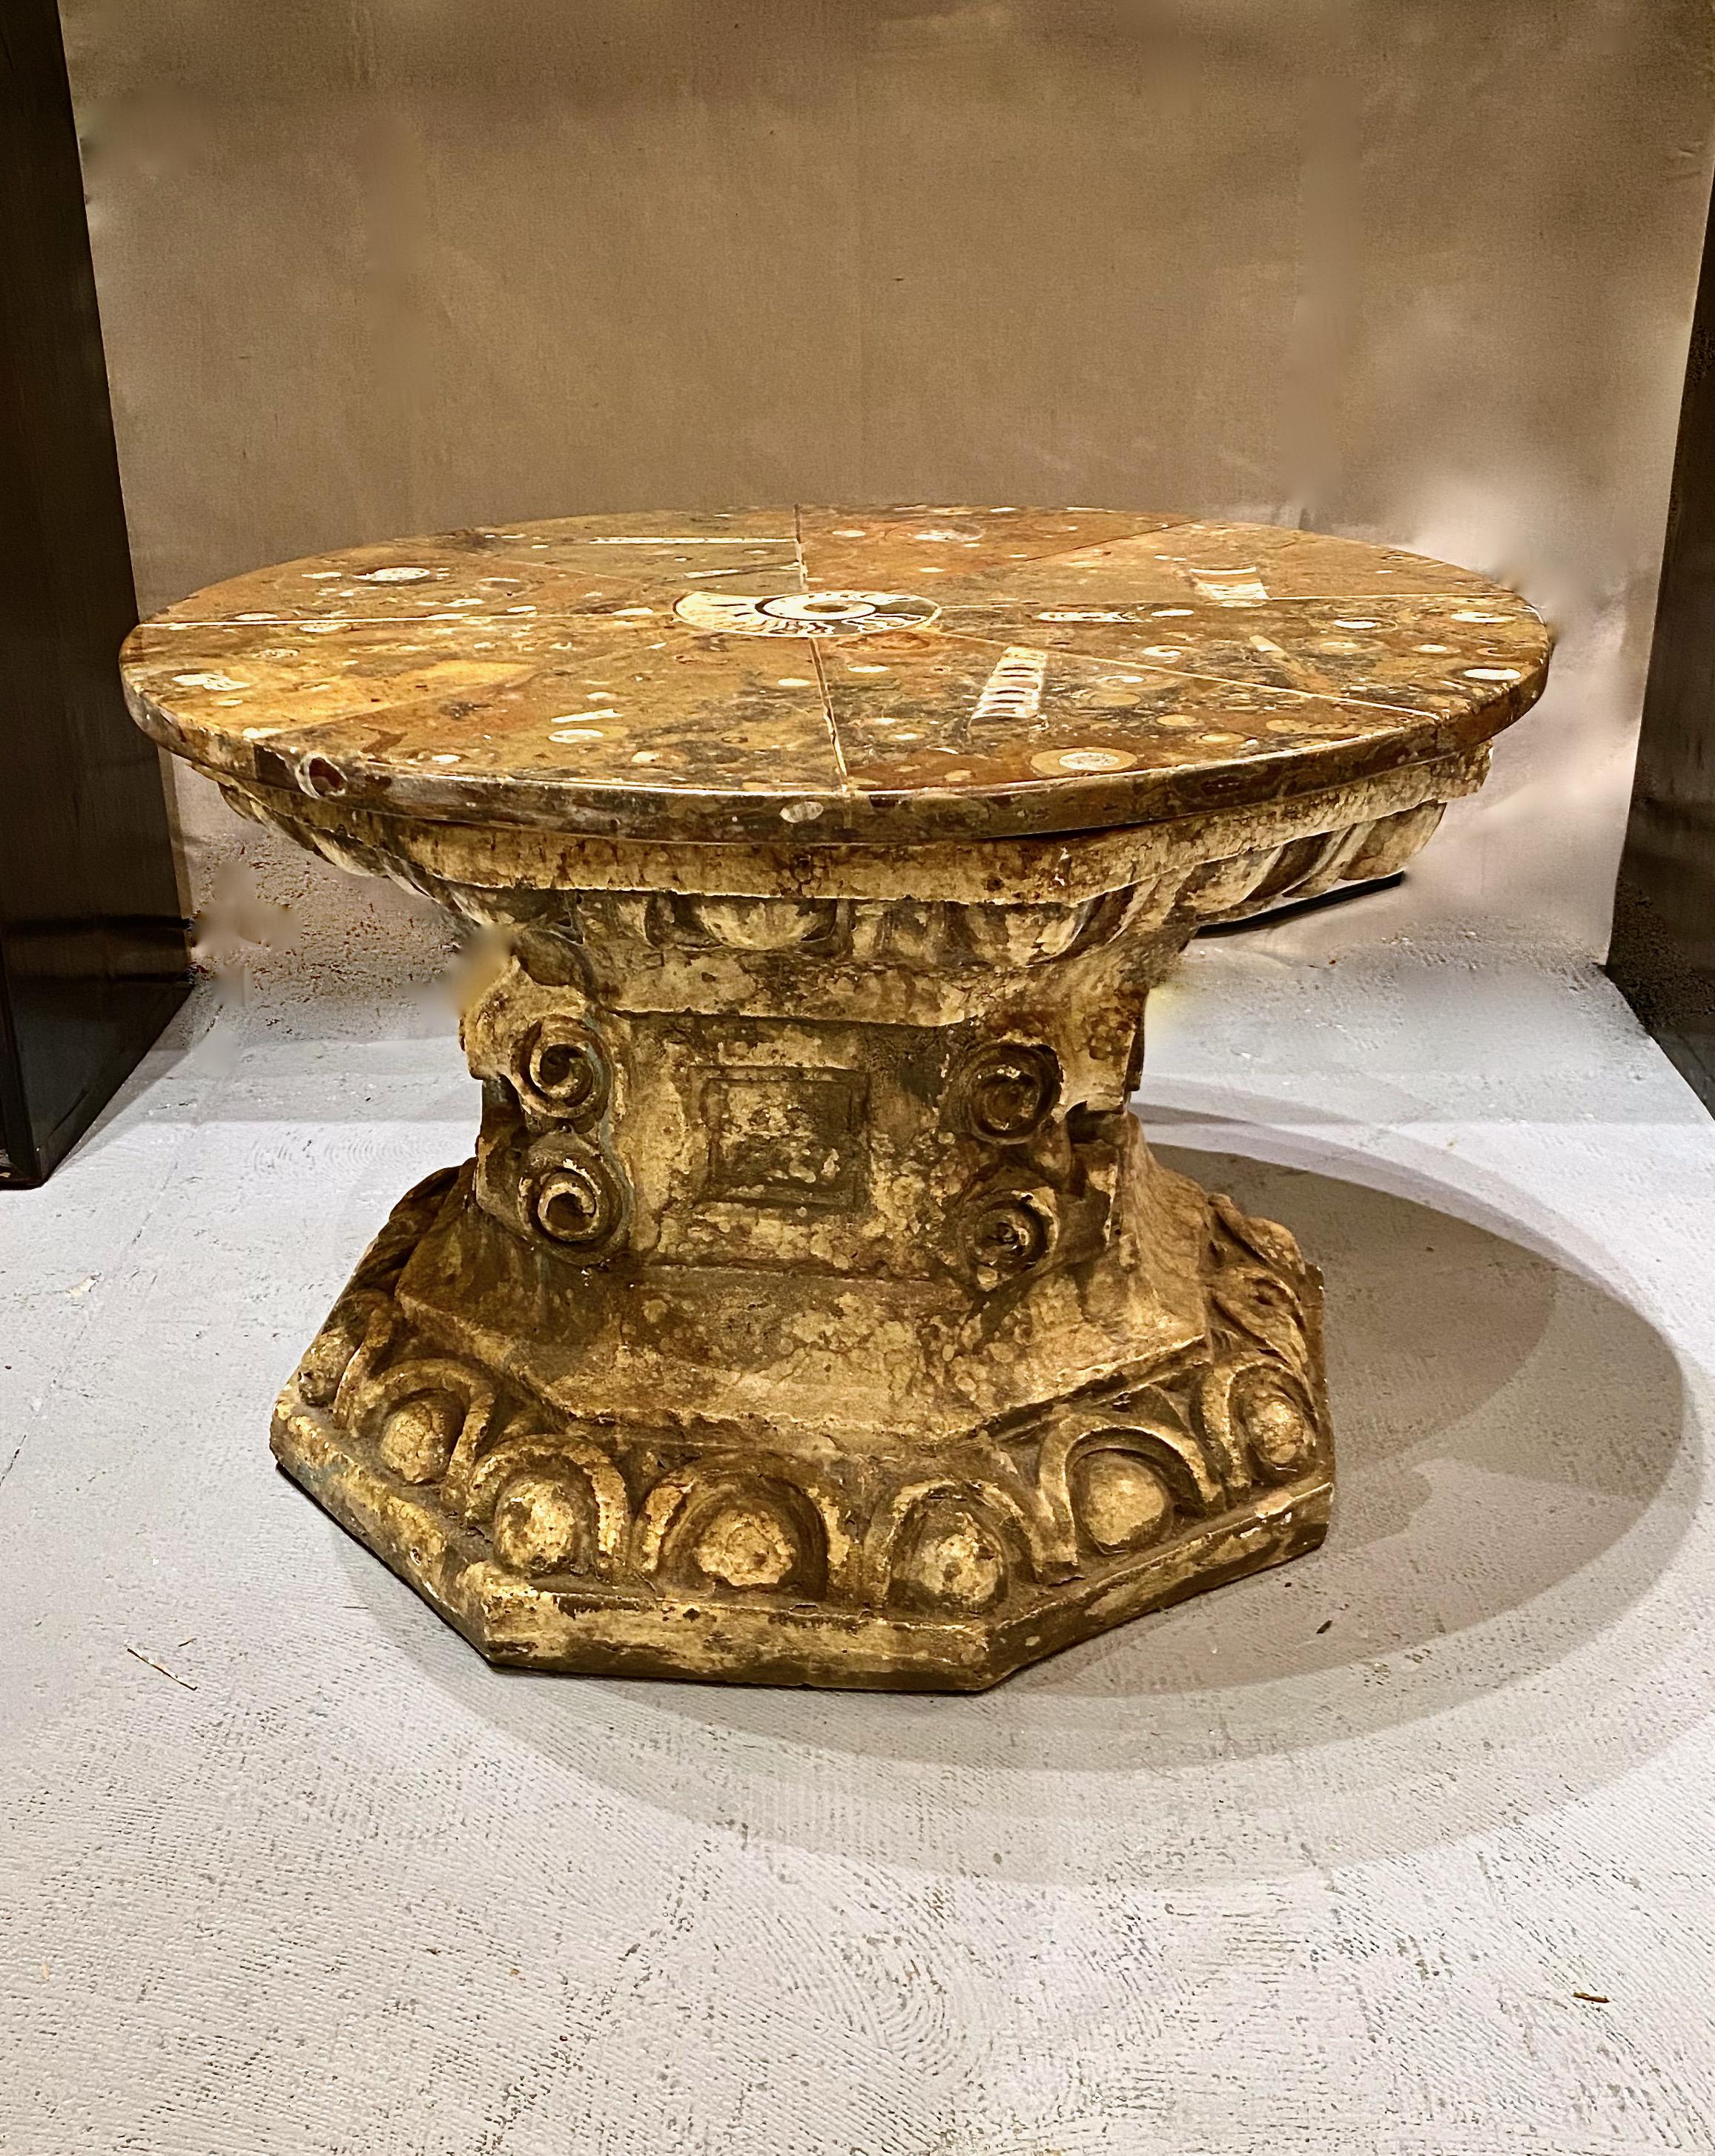 This uniquely created table could easily have been inspired by the the aesthetics of Tony Duquette. The neoclassical heavy cast plaster plinth is eight-side and detailed in an egg-and-dart design, and well as in cast scrolls. Additionally, the